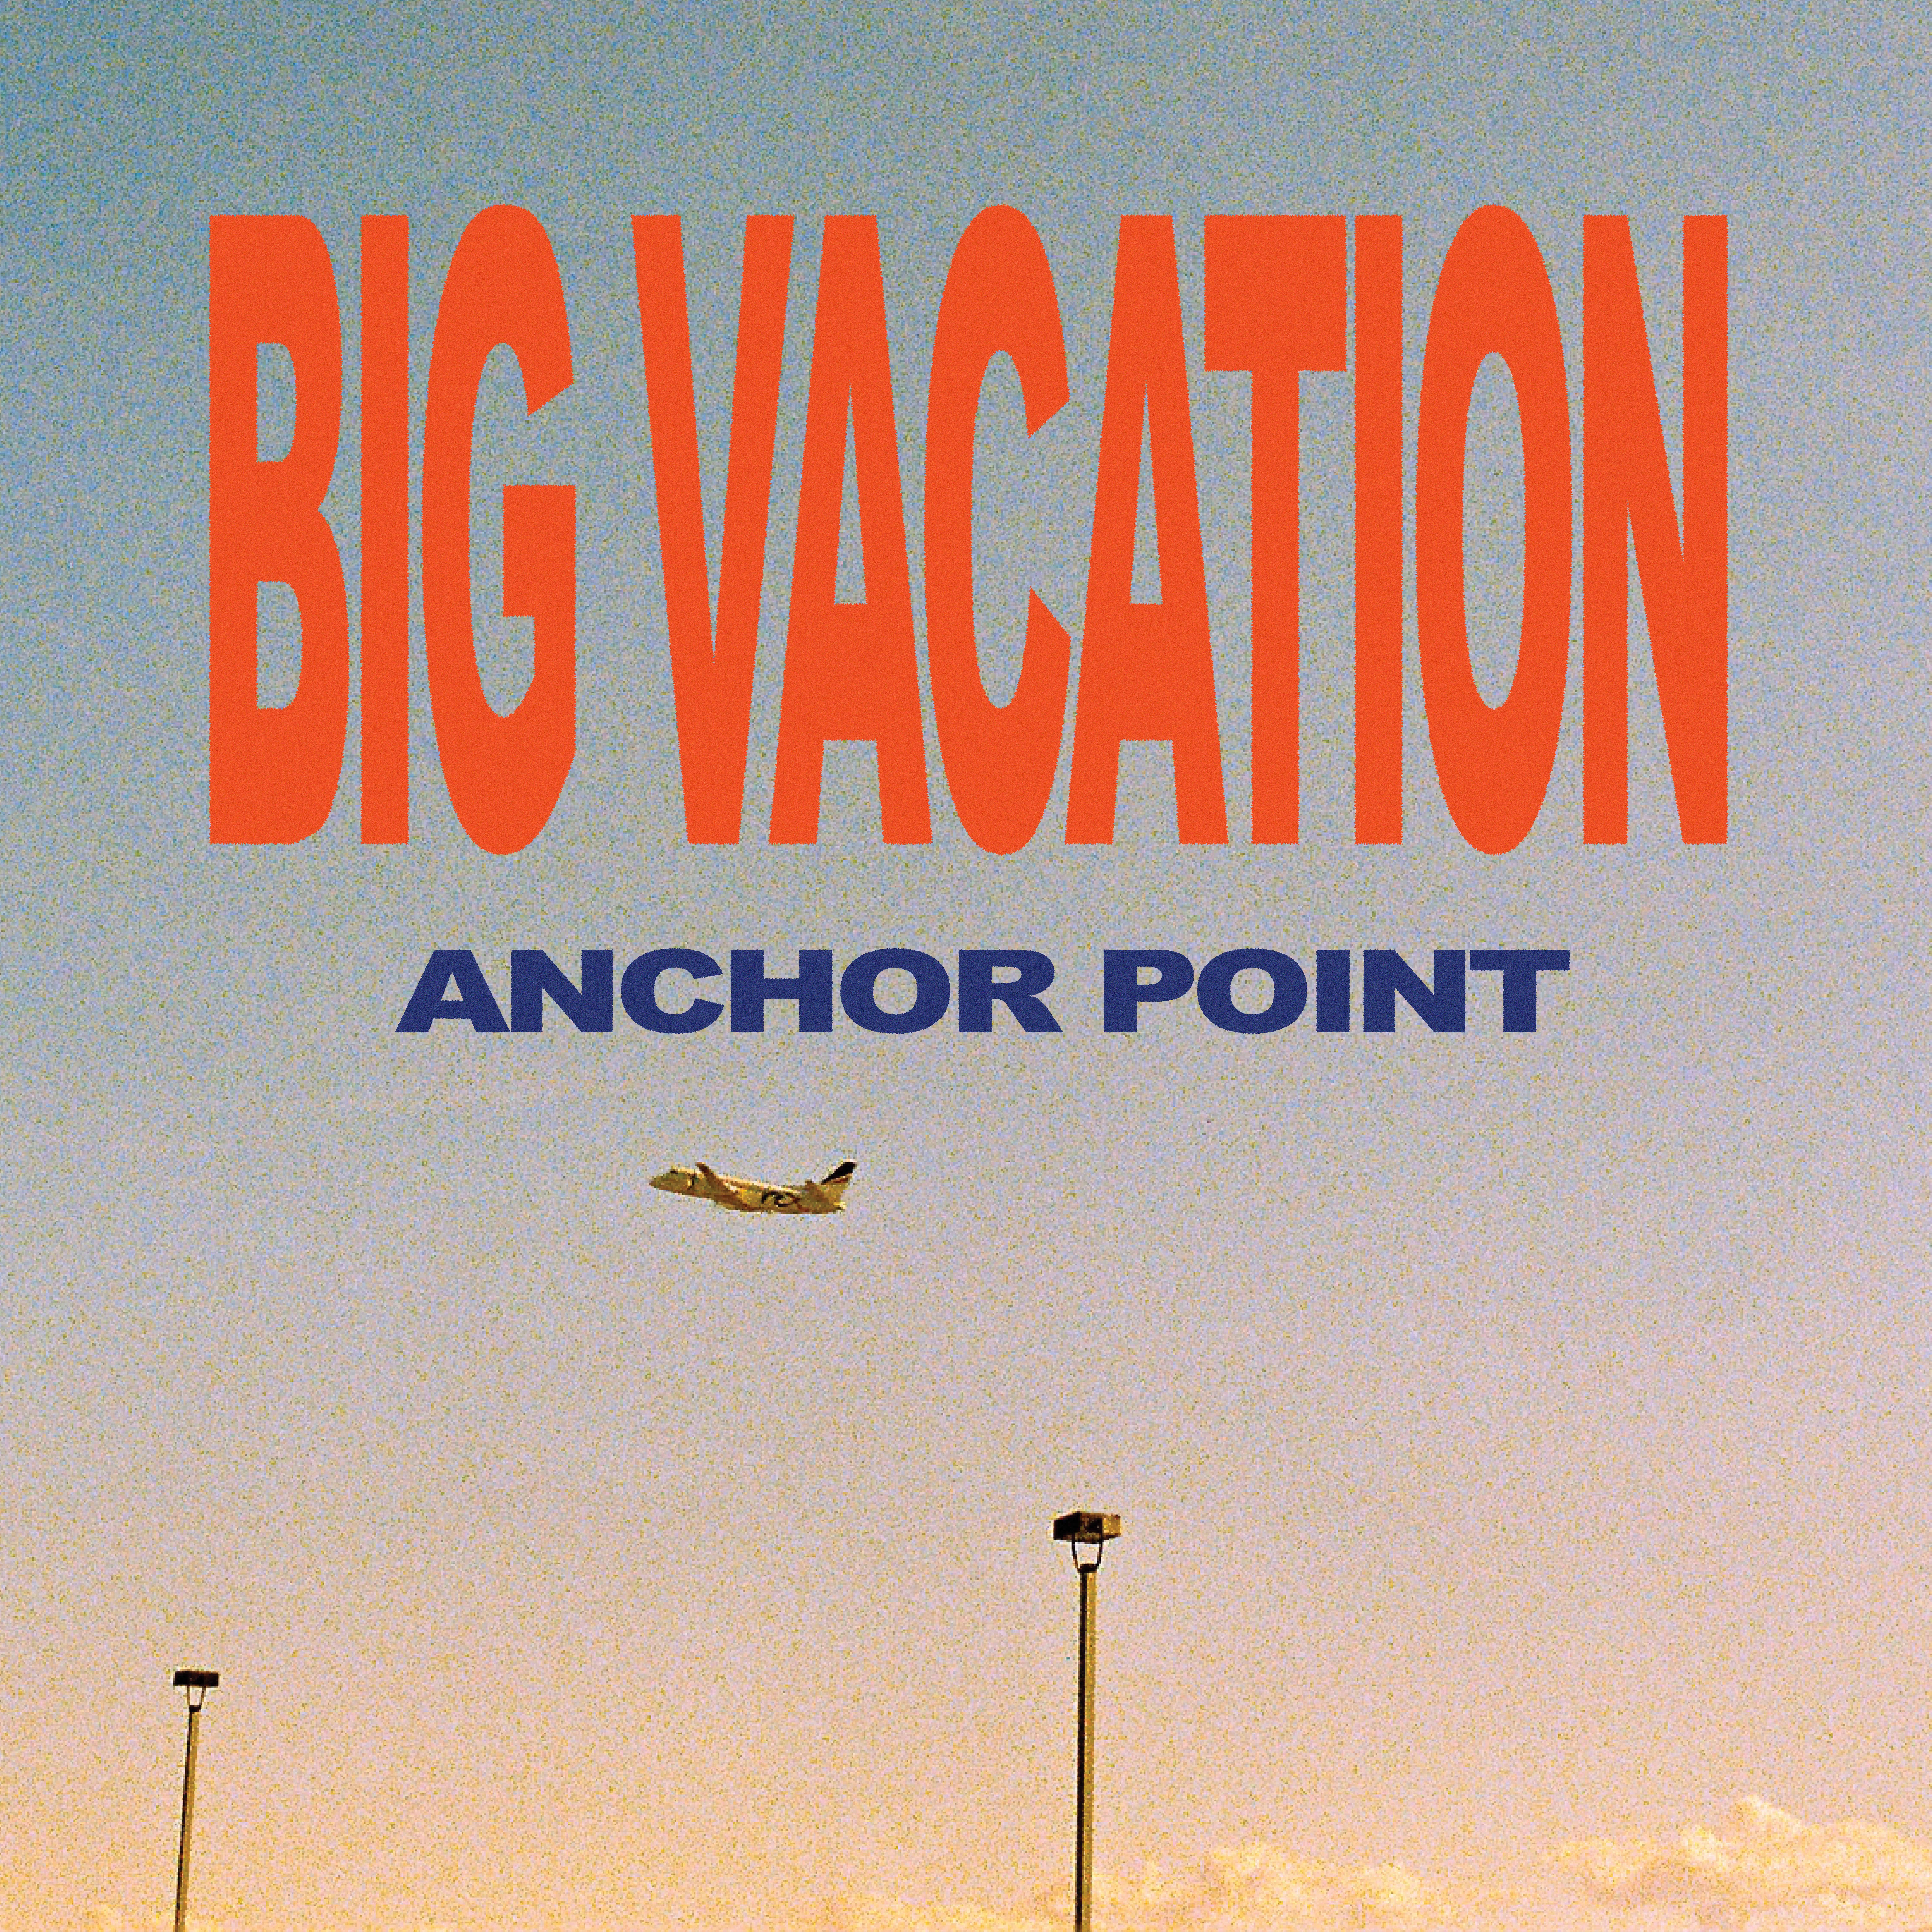 Artwork for track: Anchor Point by Big Vacation